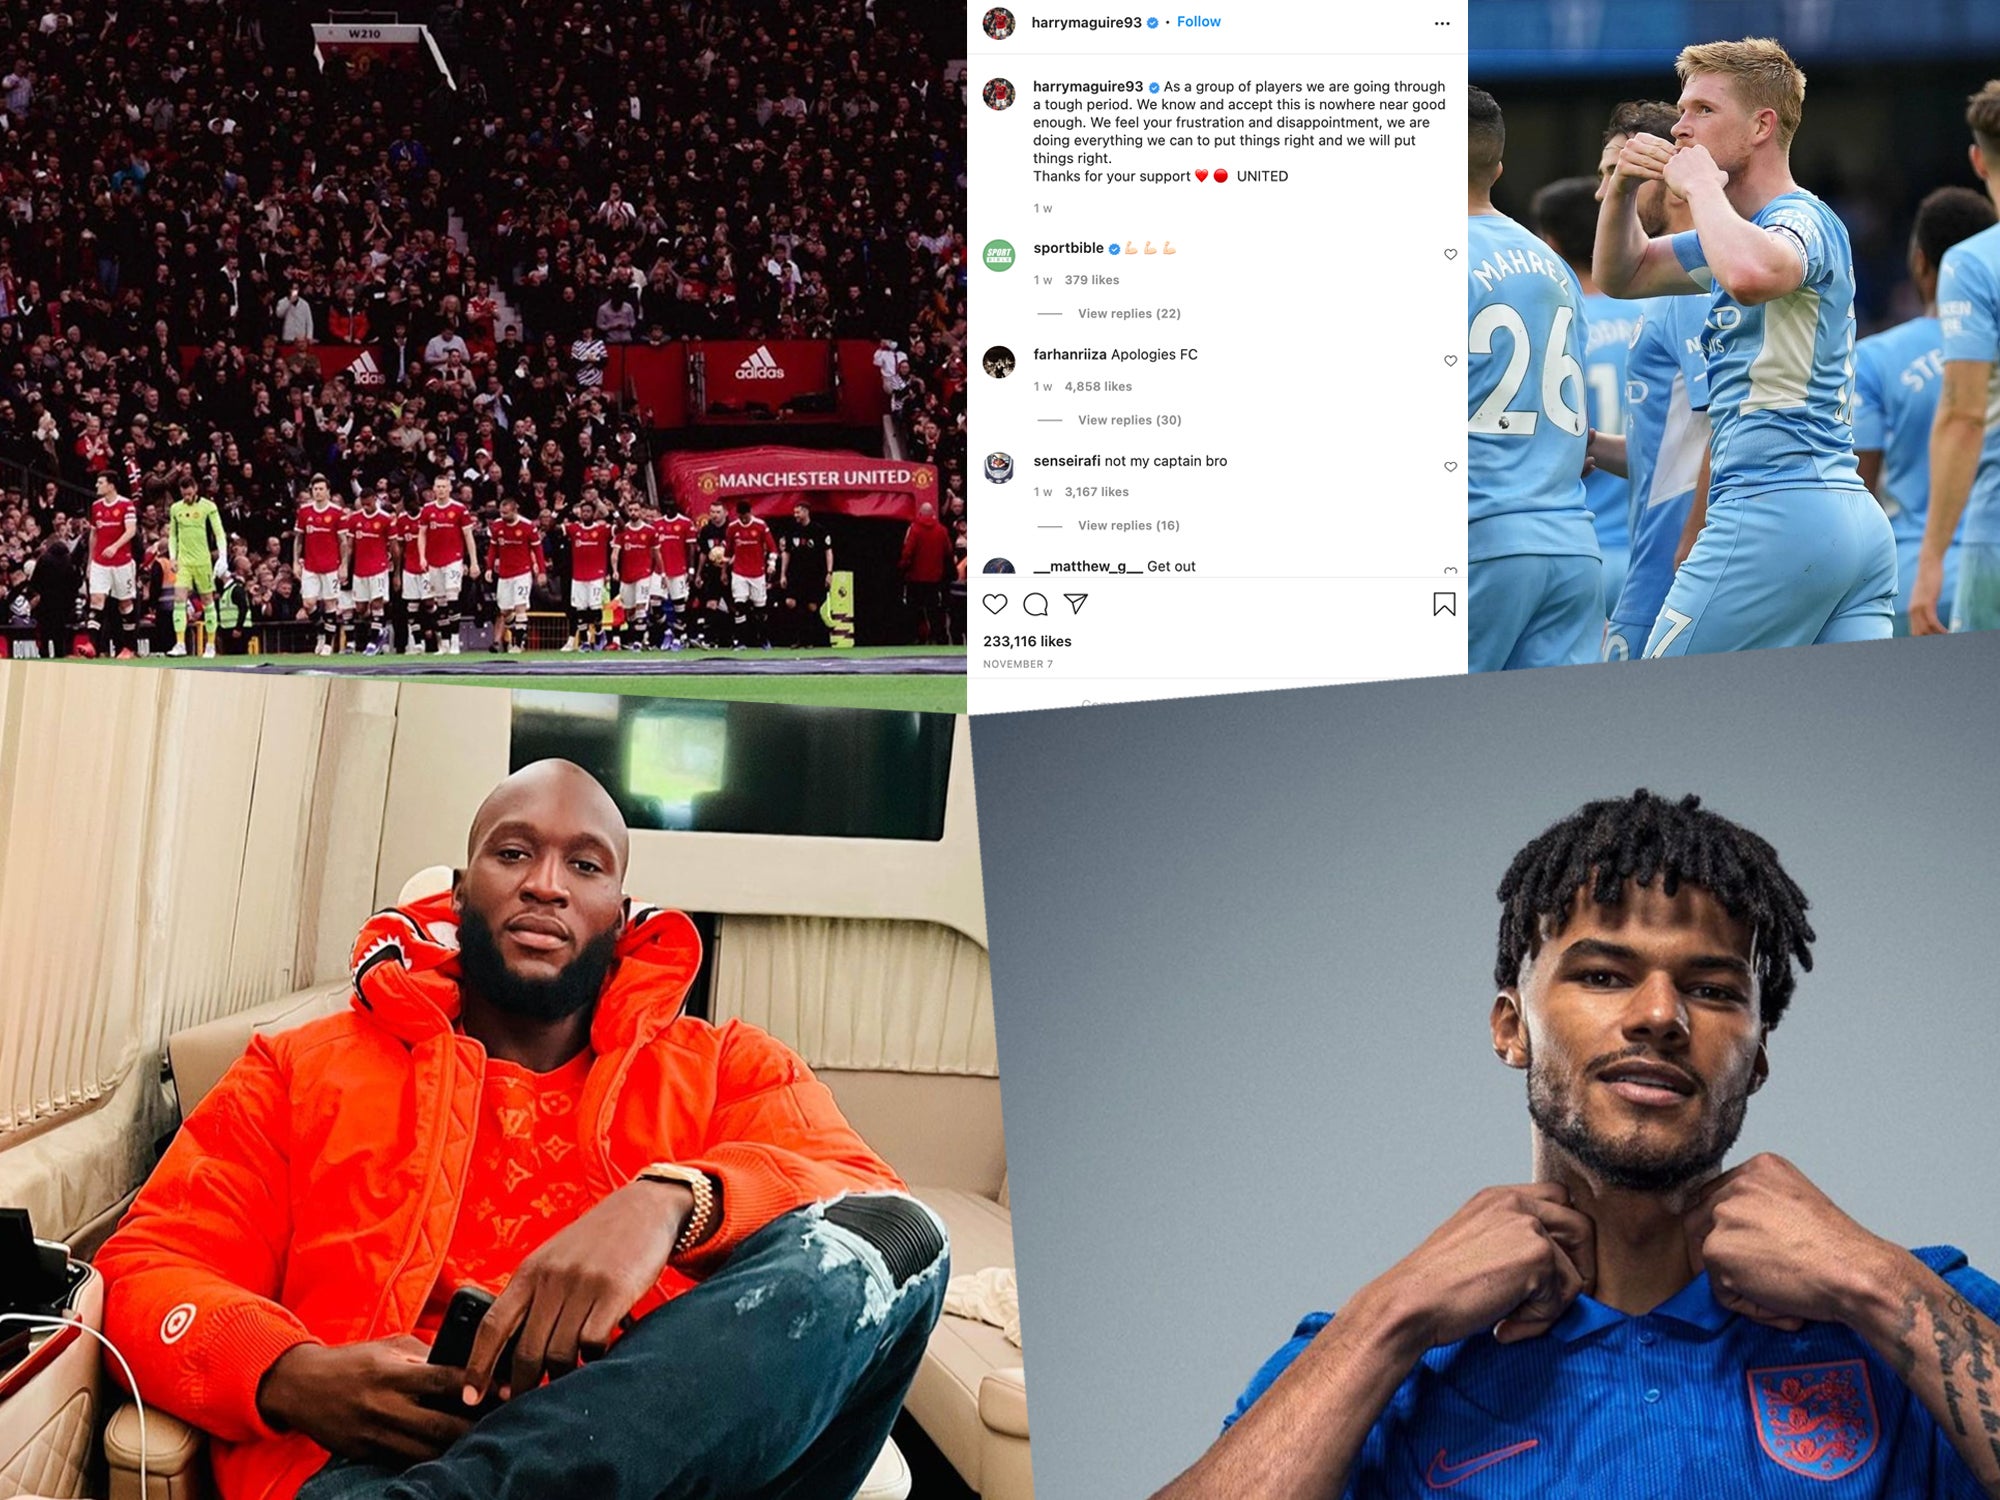 Most footballers take a hands-on approach to their social media